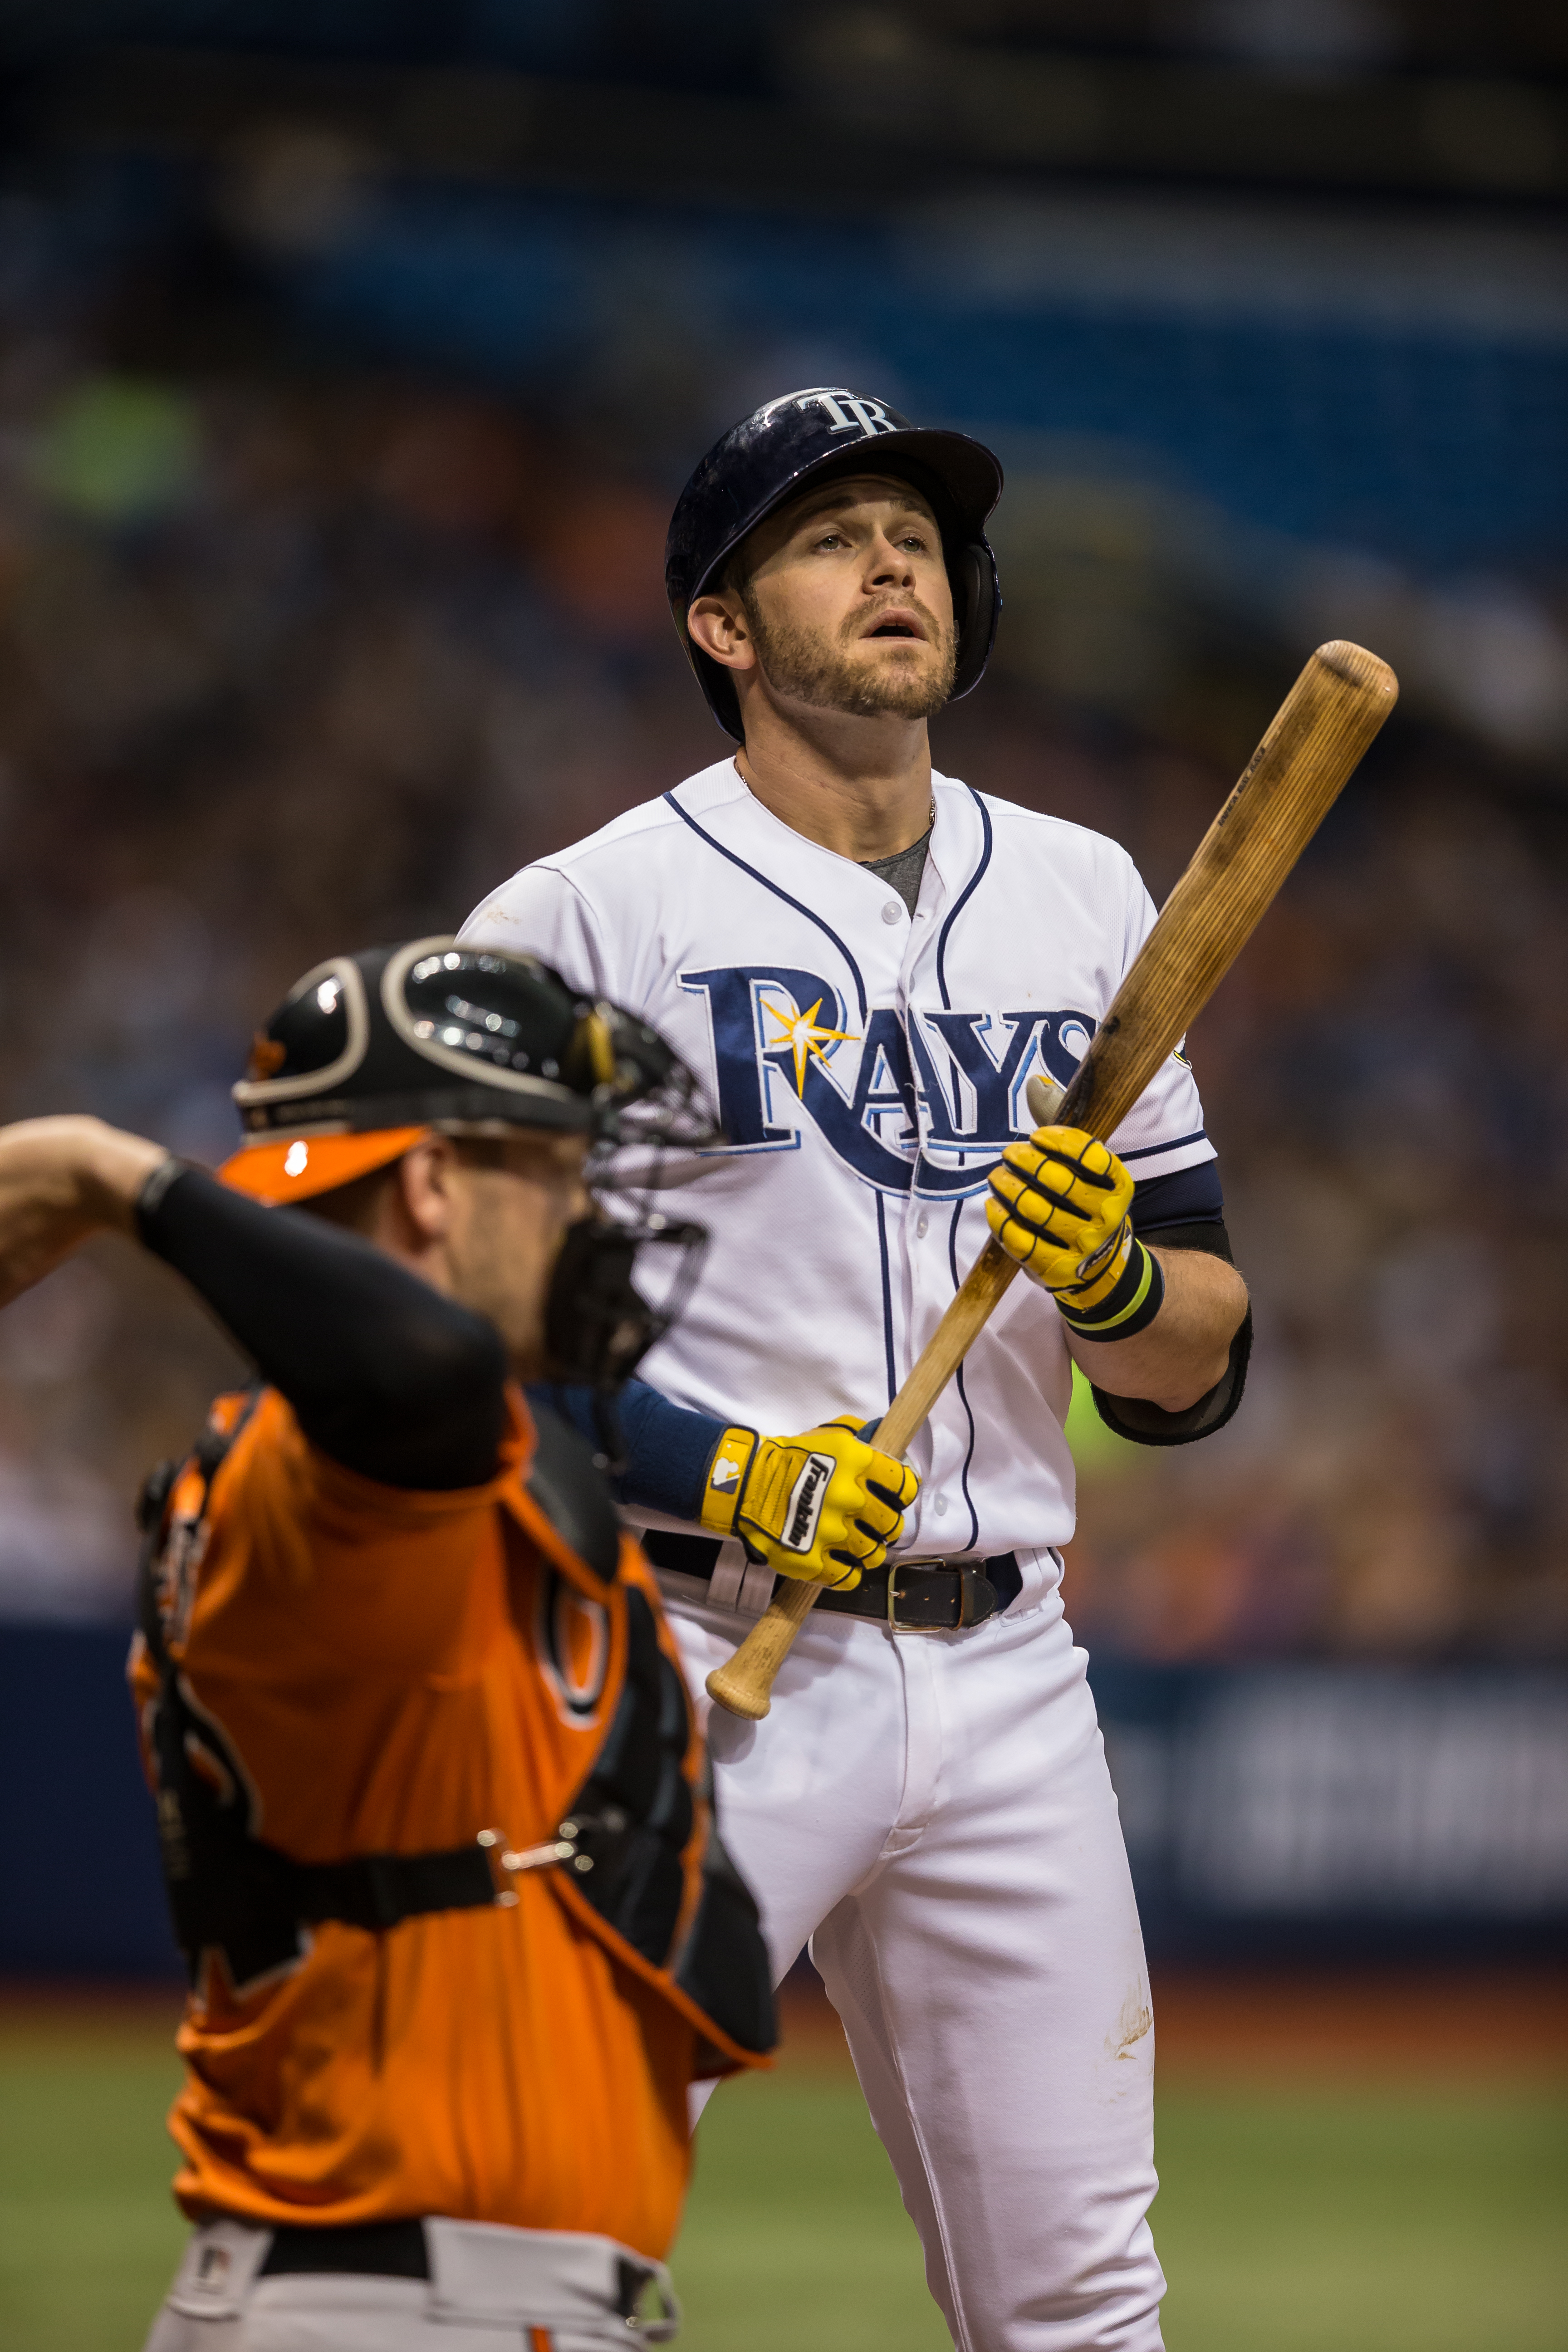 Longoria had two hits to help the Rays' victory./TRAVIS PENDERGRASS